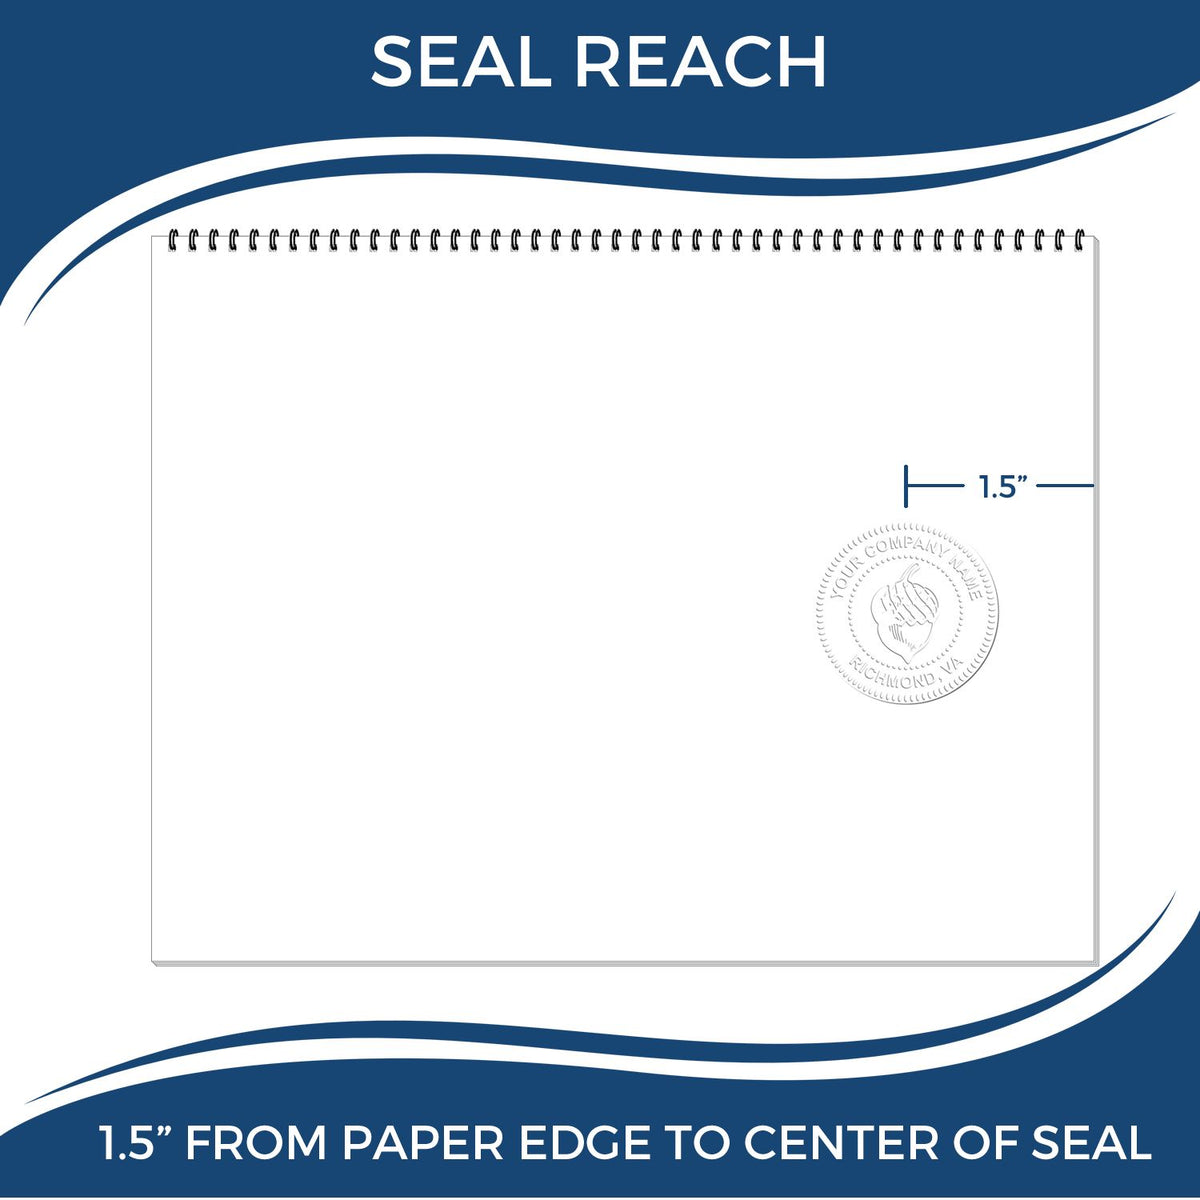 An infographic showing the seal reach which is represented by a ruler and a miniature seal image of the Hybrid Louisiana Architect Seal